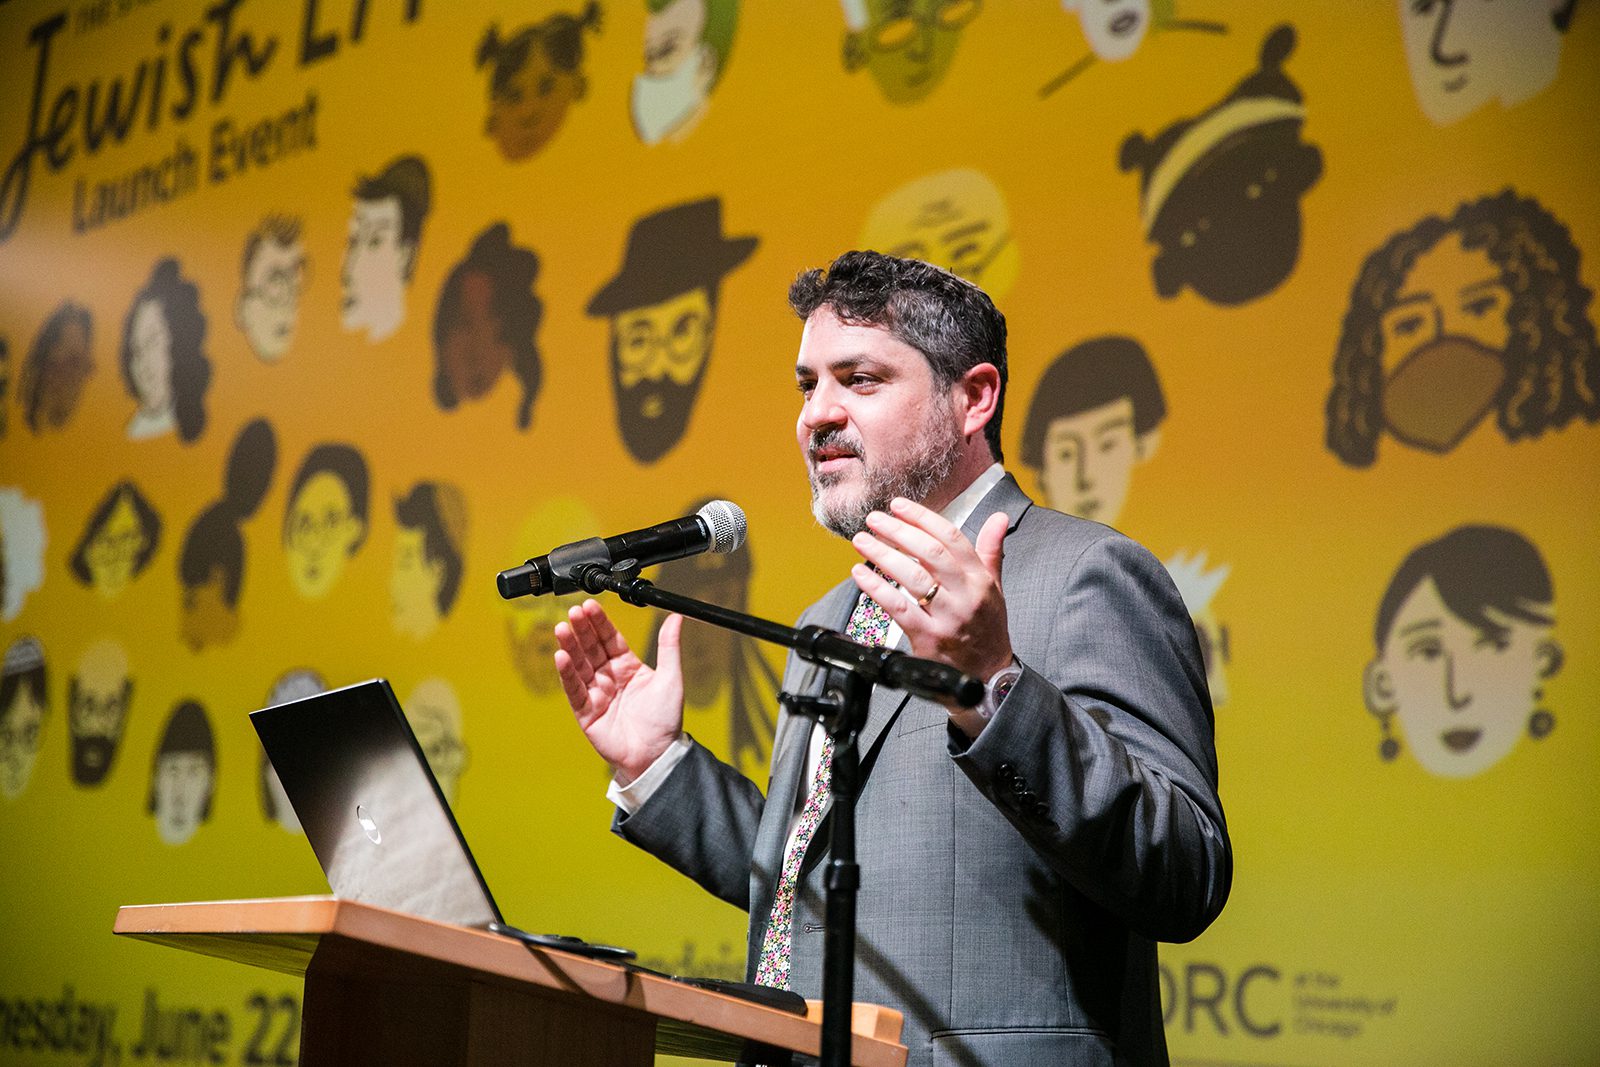 Rabbi Noah Farkas speaks during the 2021 Study of Jewish L.A. launch event at the Skirball Cultural Center, Wednesday, June 22, 2022, in Los Angeles. Photo by TLKmultimedia